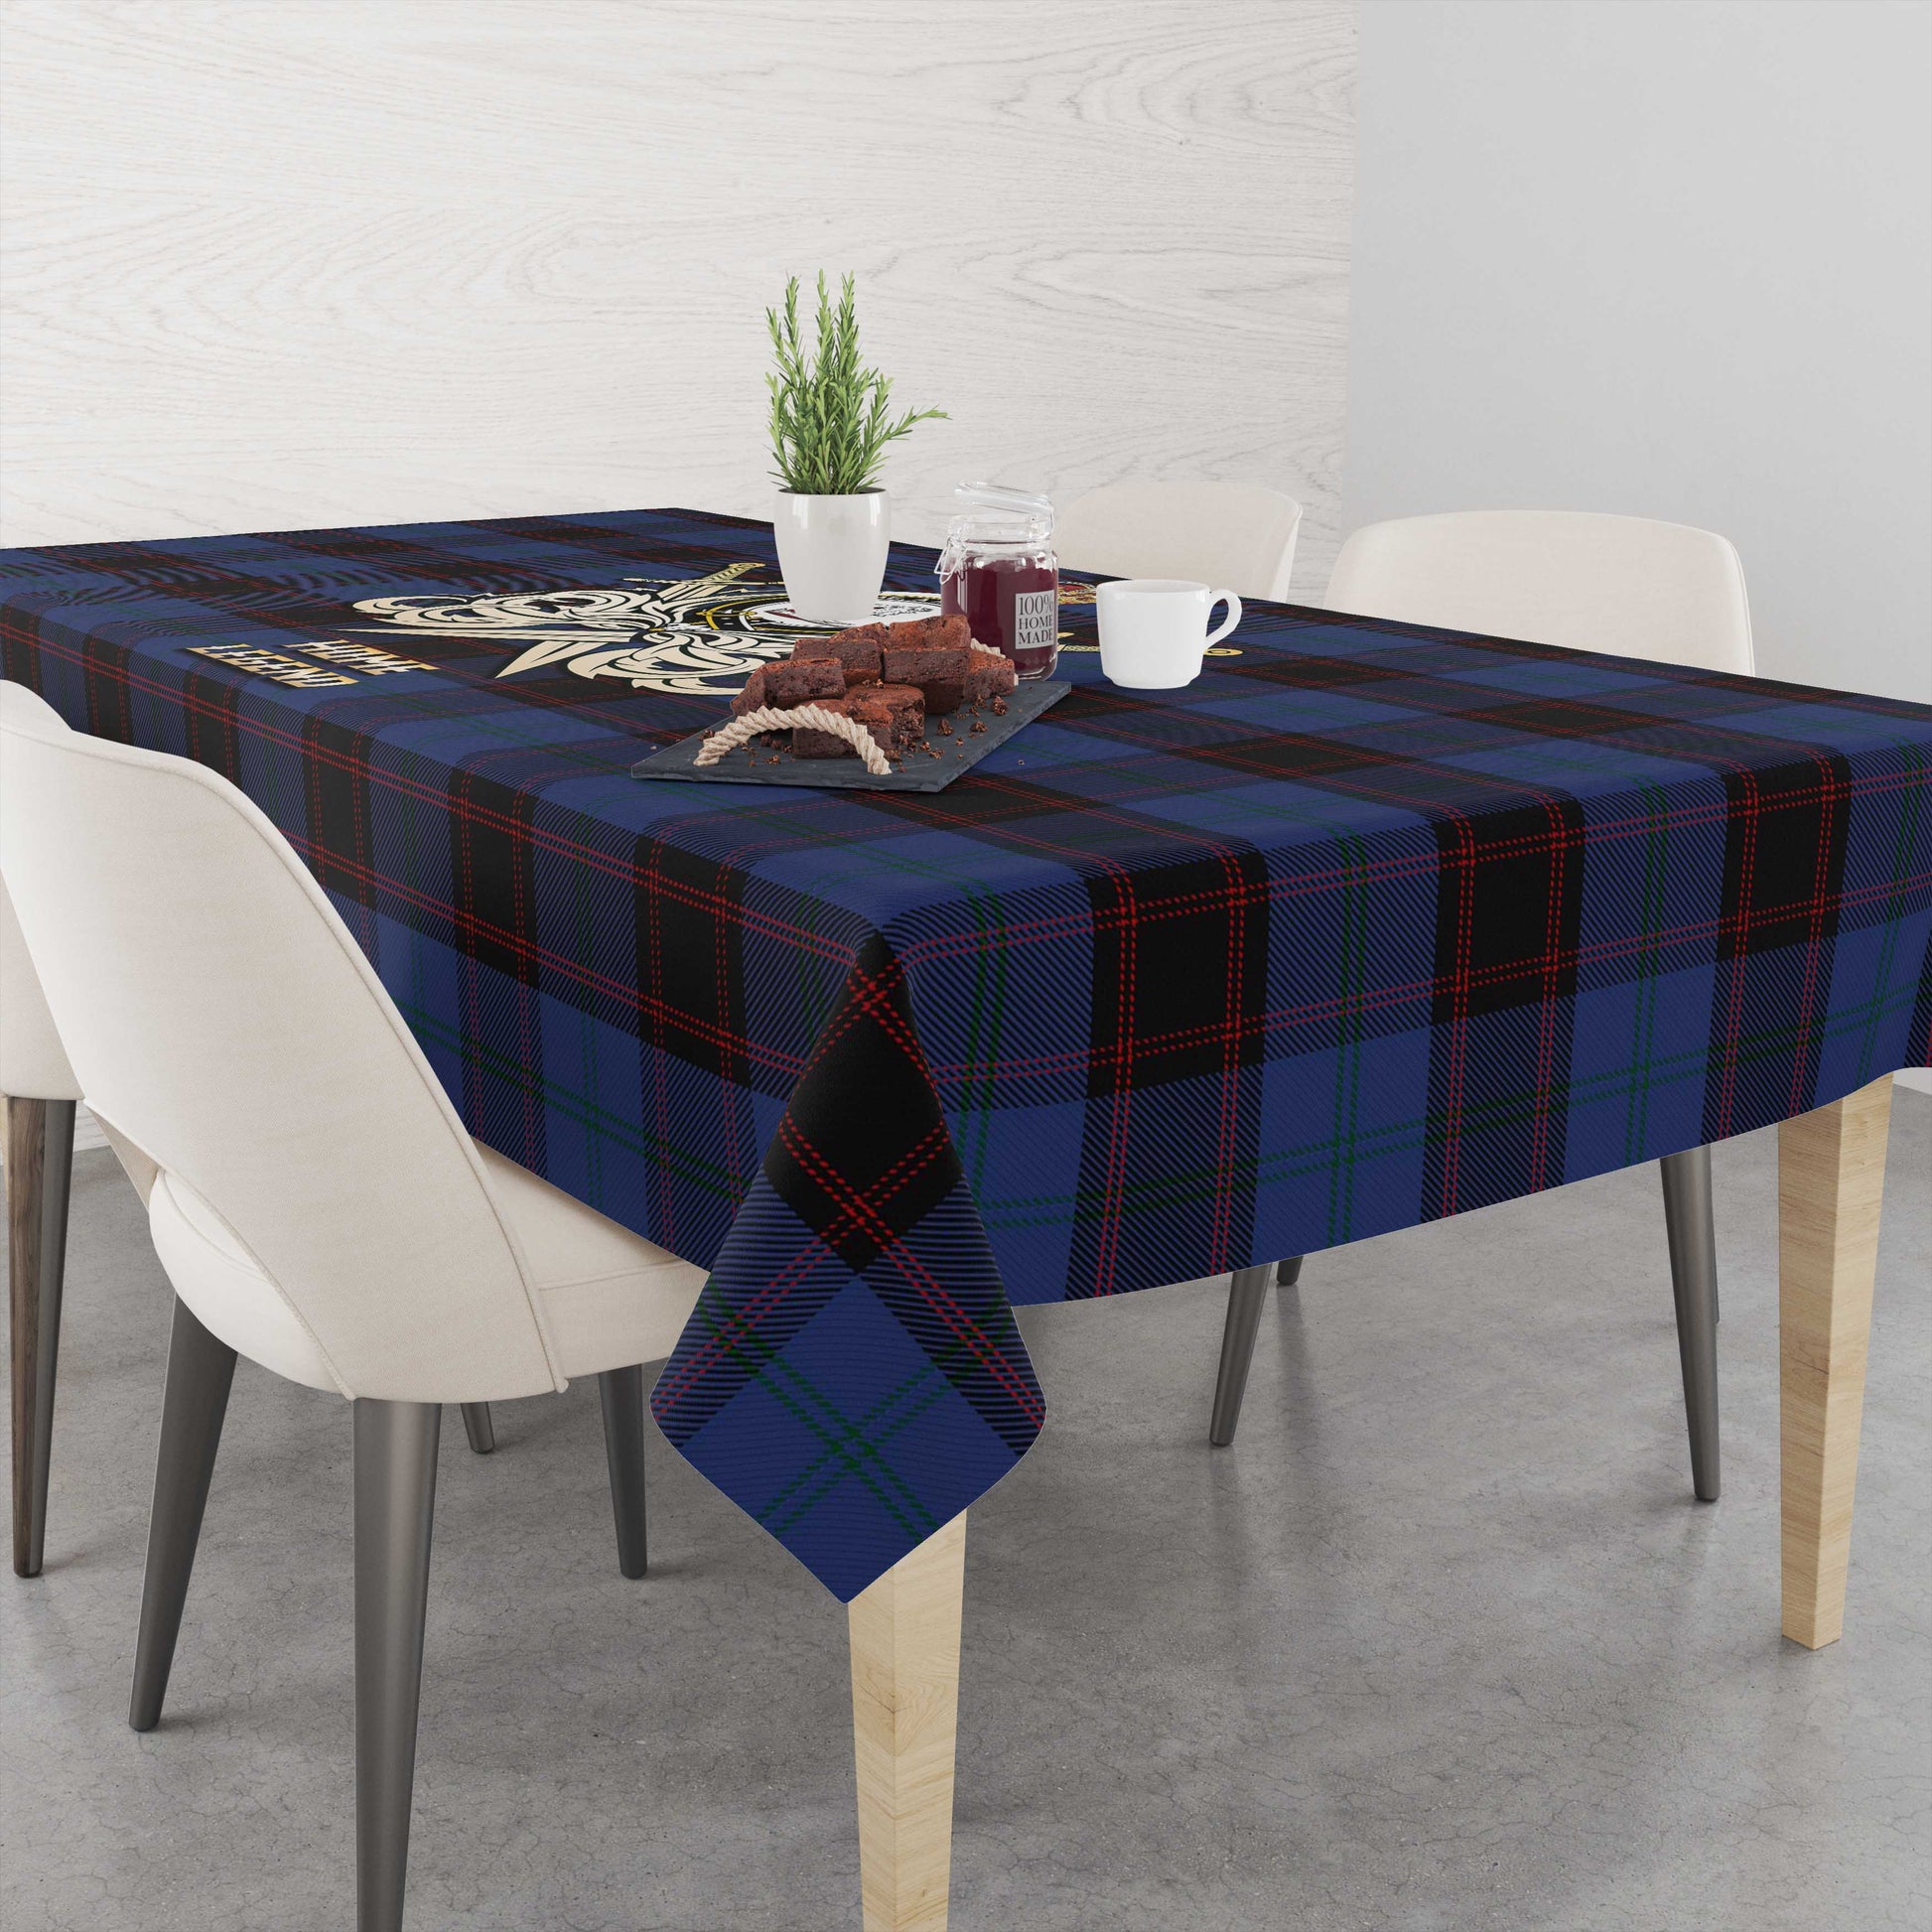 Tartan Vibes Clothing Home (Hume) Tartan Tablecloth with Clan Crest and the Golden Sword of Courageous Legacy